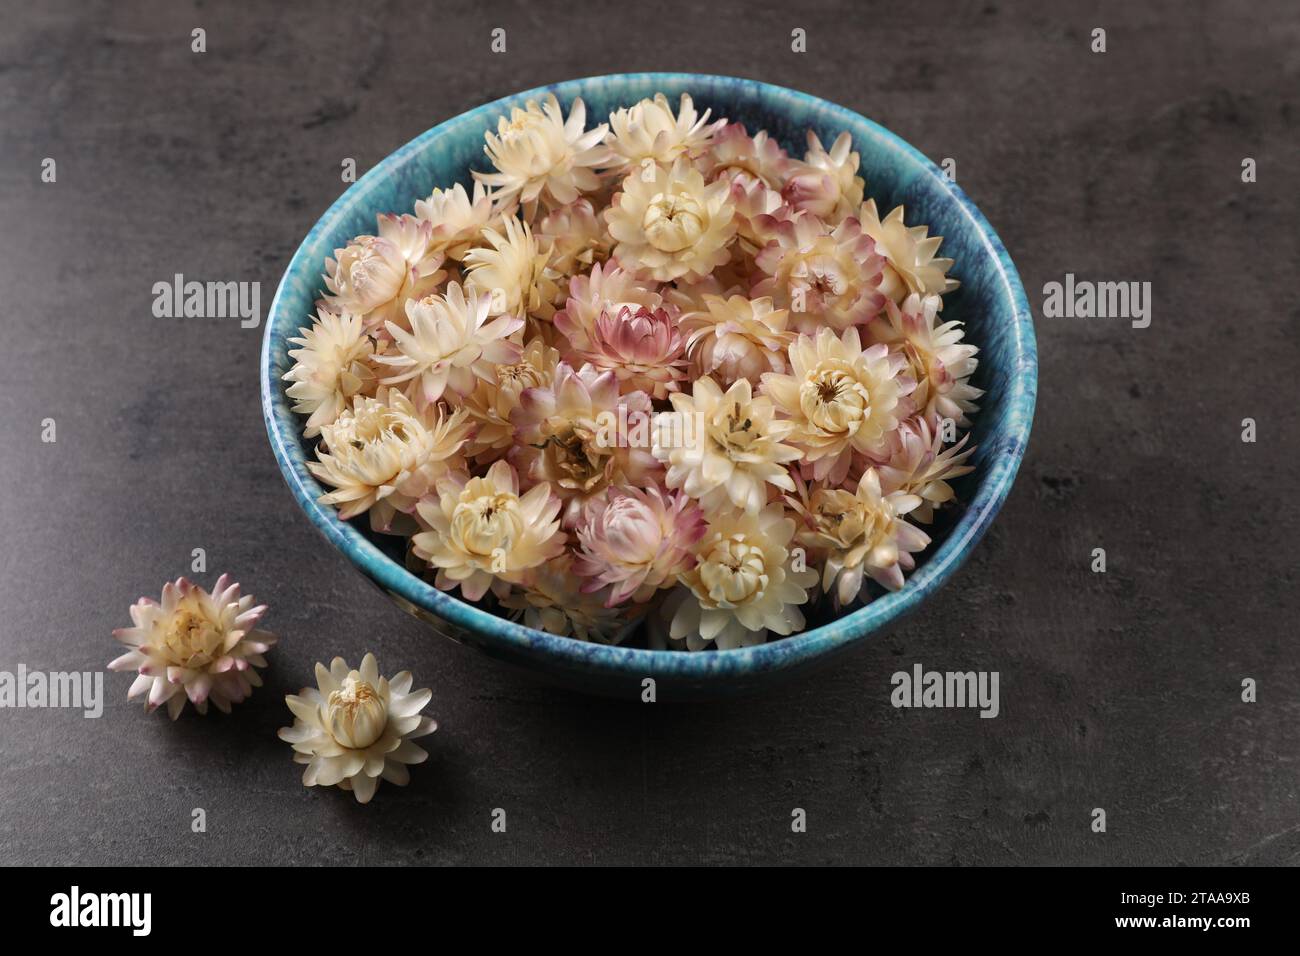 Bowl with dried strawflowers on grey table Stock Photo